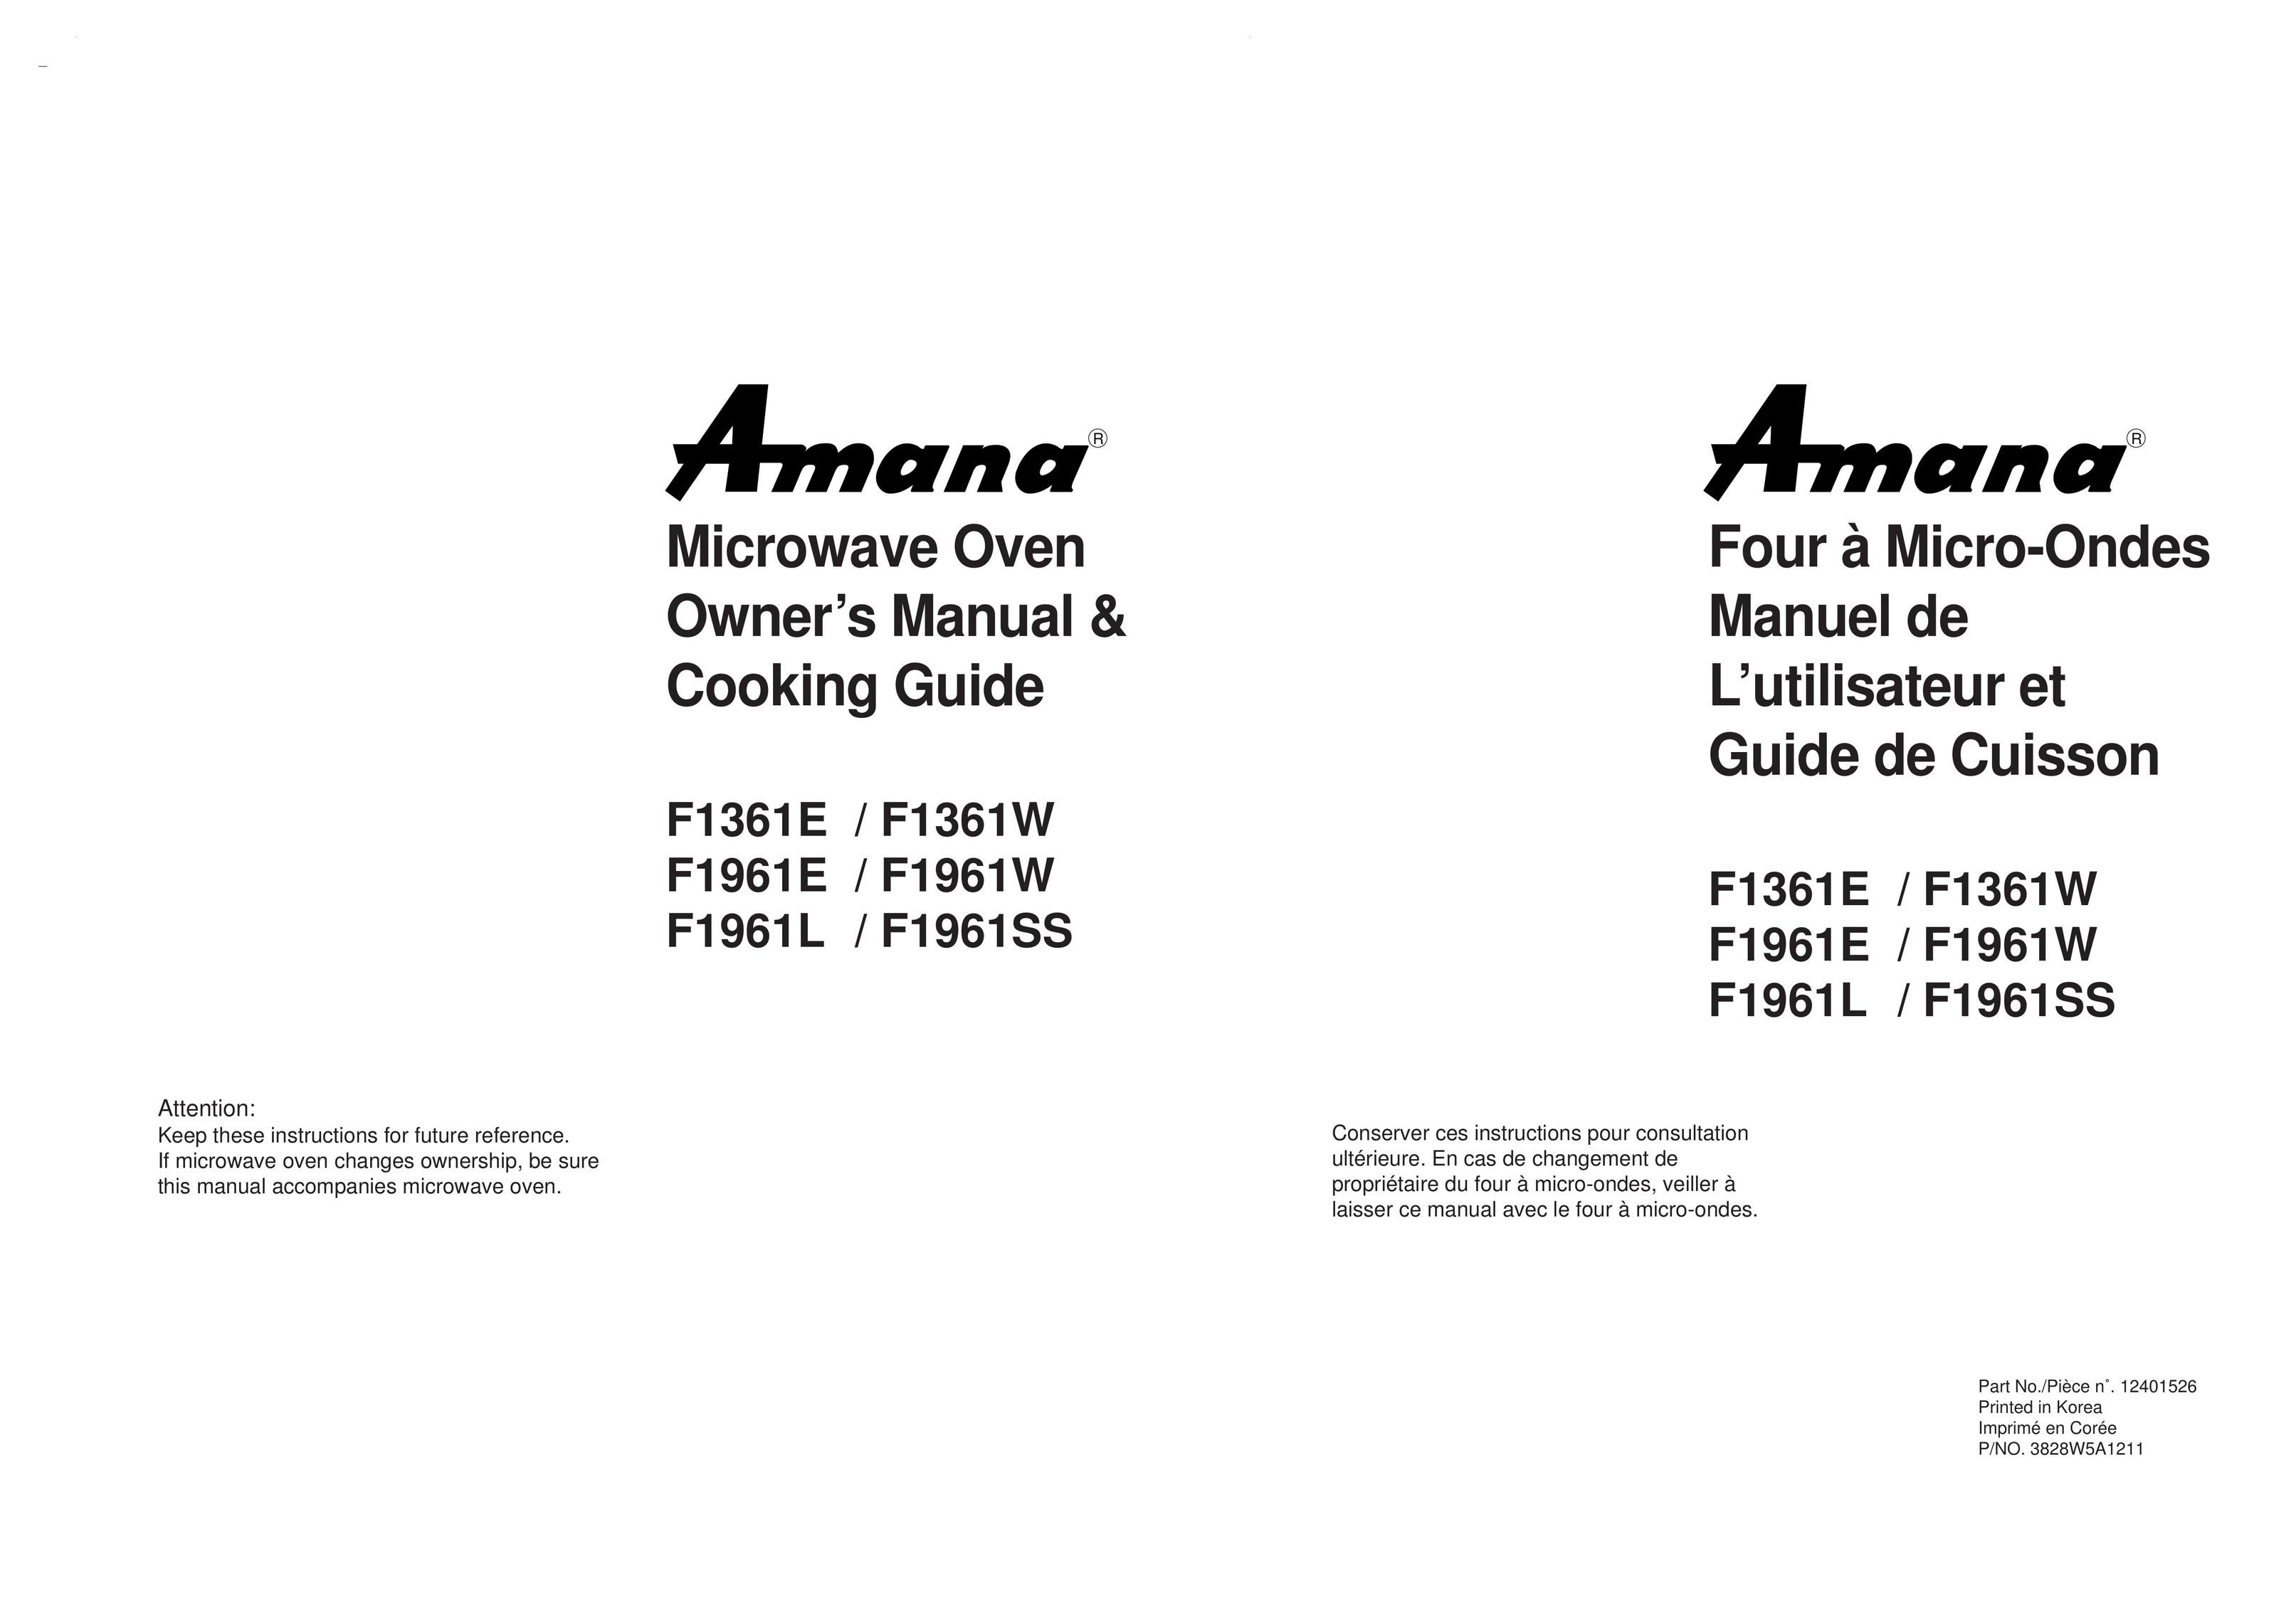 Amana F1961L/F1961SS Microwave Oven User Manual